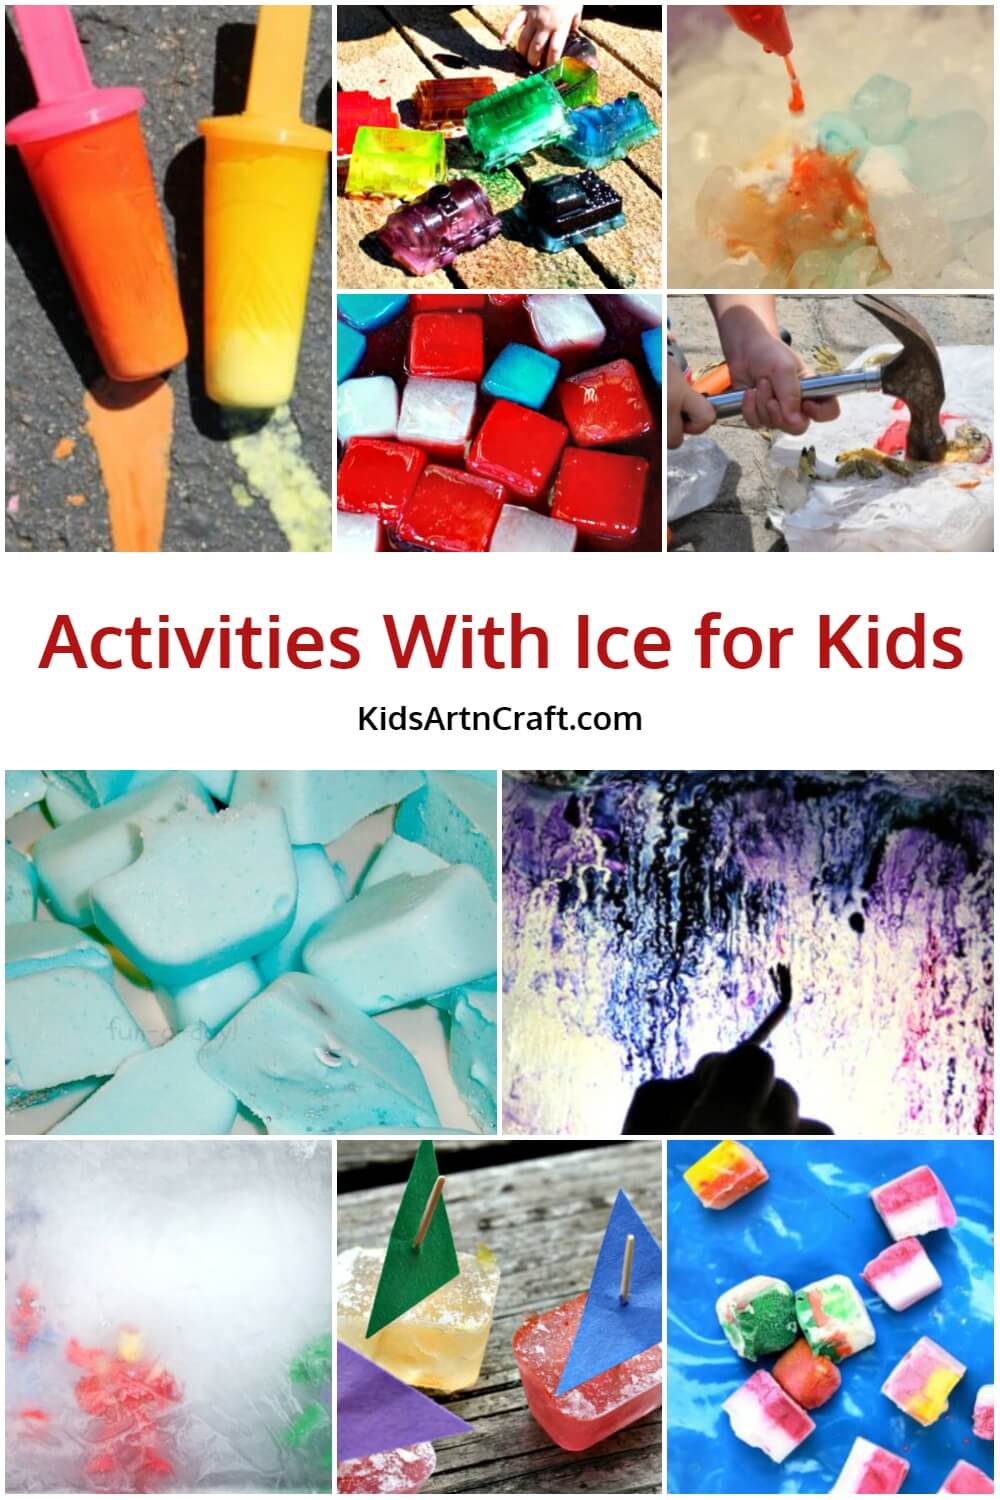  Activities With Ice for Kids